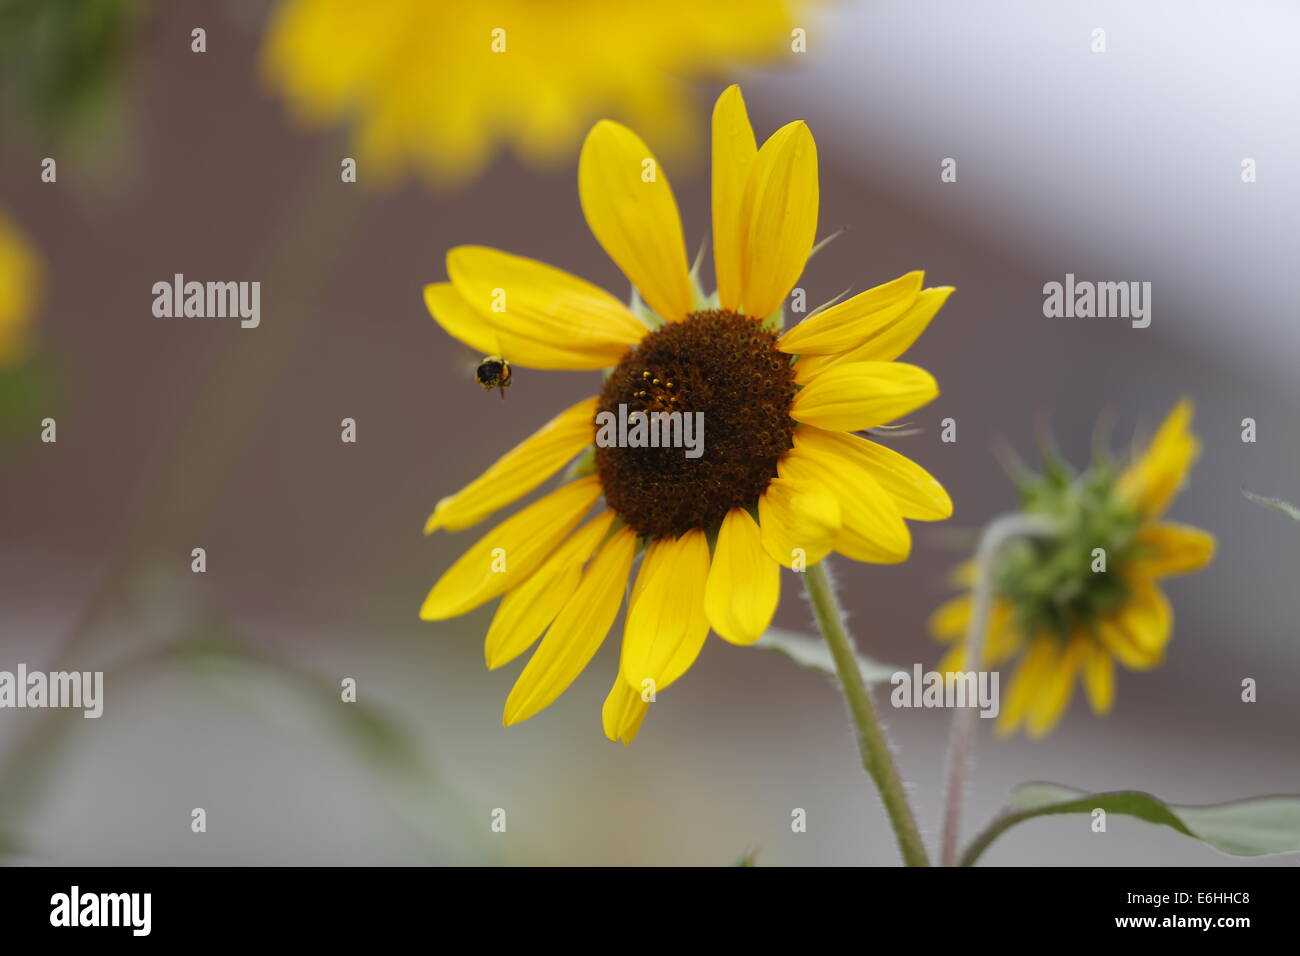 Summer sunflowers in a Bloomington, Indiana alley. sun flower flowers yellow Stock Photo